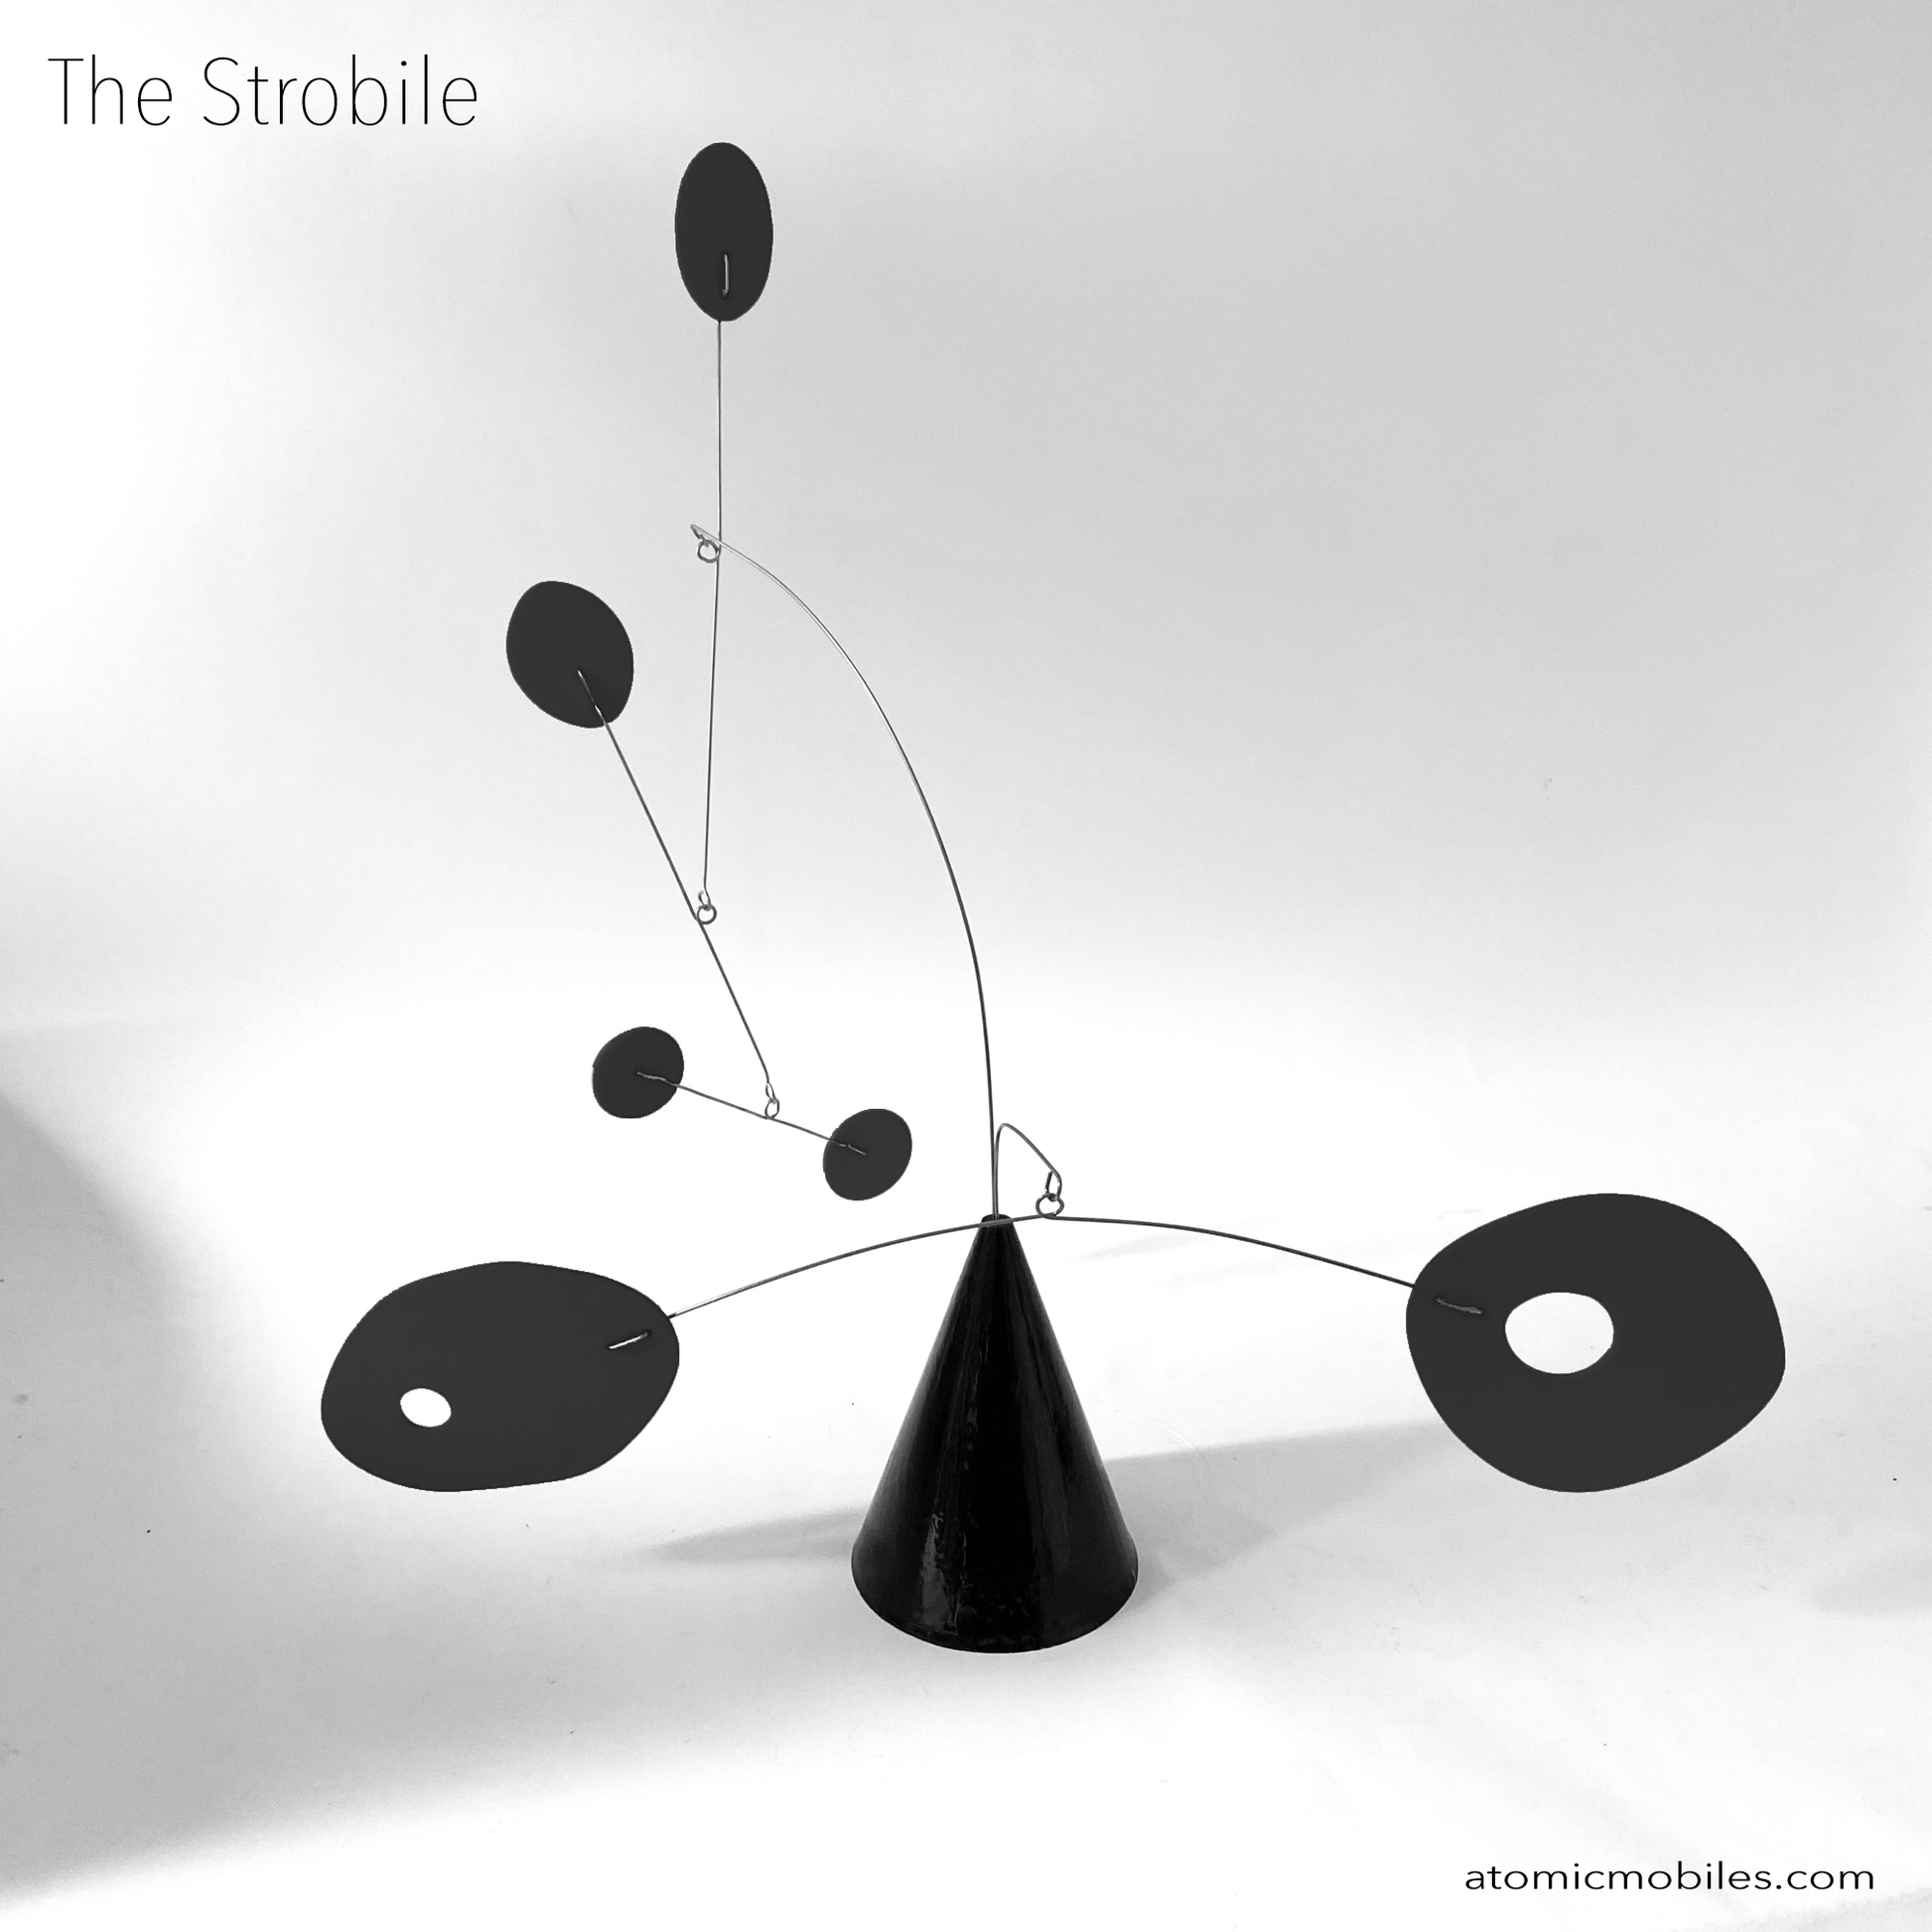 The Strobile table top kinetic art sculpture in all Black by AtomicMobiles.com